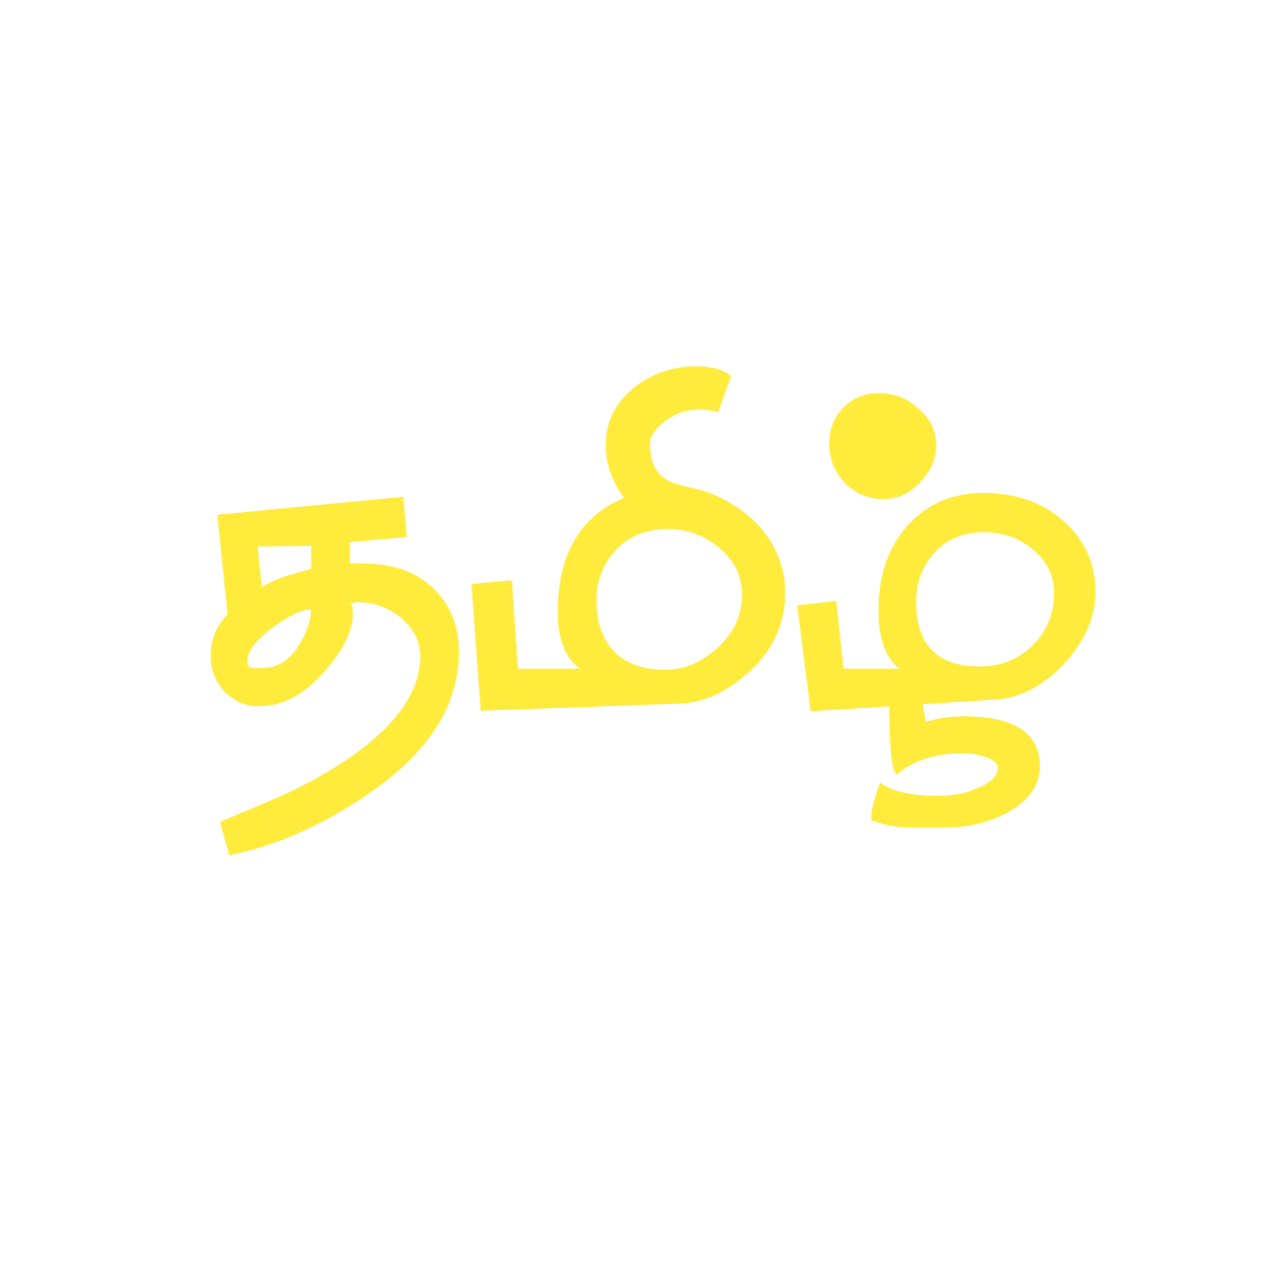 Download Free 3413+ Tamil Stylish Font Ttf Zip File Yellowimages Mockups these mockups if you need to present your logo and other branding projects.